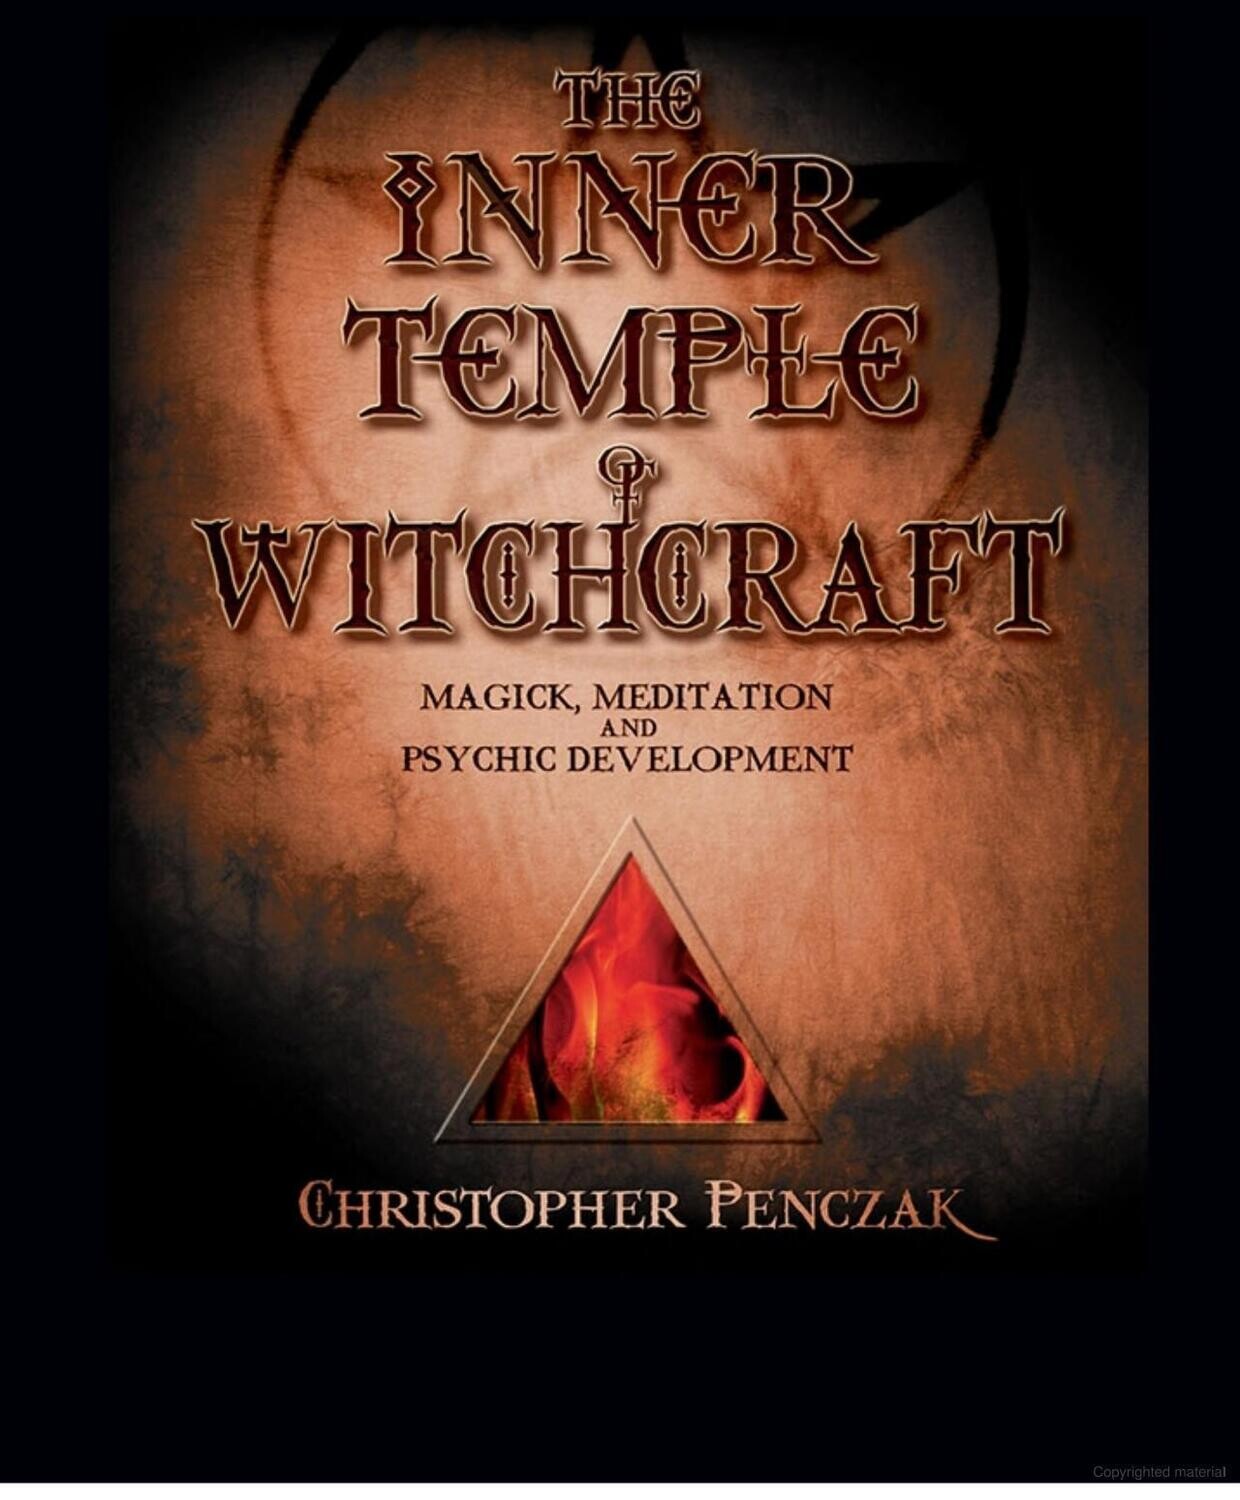 The Inner Temple of Witchcraft:
Magick, Meditation and Psychic Development by Christopher Penczak